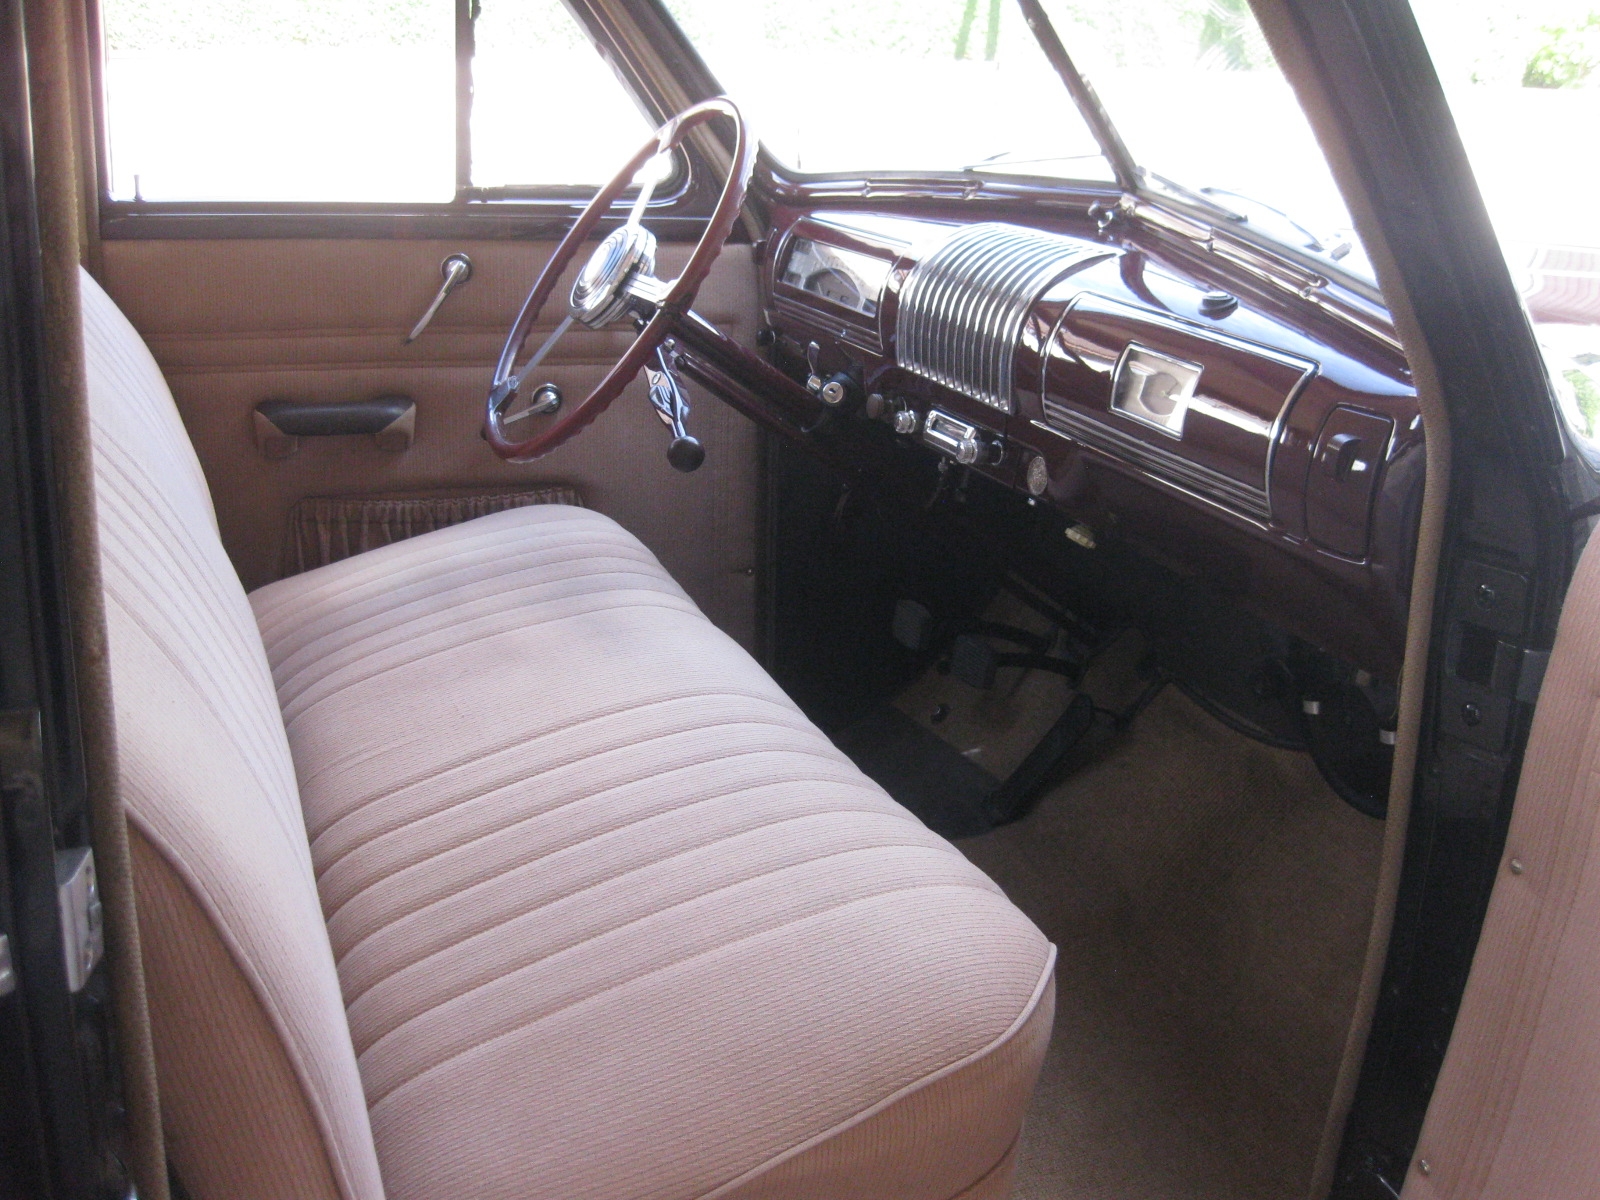 Buick Series 40 Special Eight Limousine